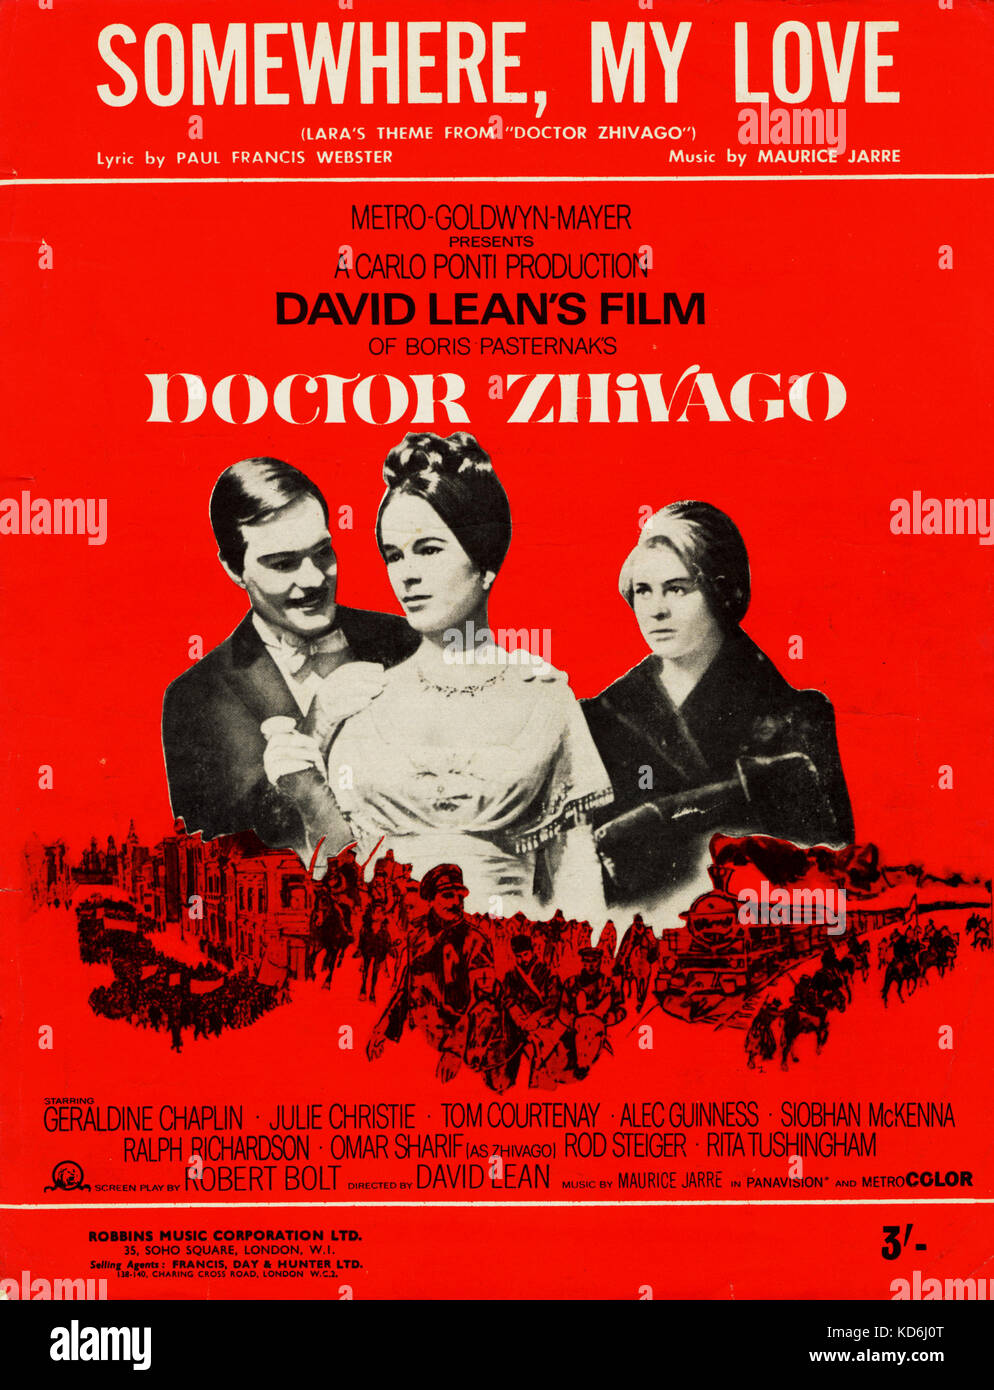 Doctor Zhivago, piano score for 'Somewhere My Love' (Lara's theme).  Directed by David Lean, music by Maurice Jarre, lyrics by Paul Francis Webster, 1965. Robbins Music Corporation Ltd.  35 Soho Square, London. Stock Photo